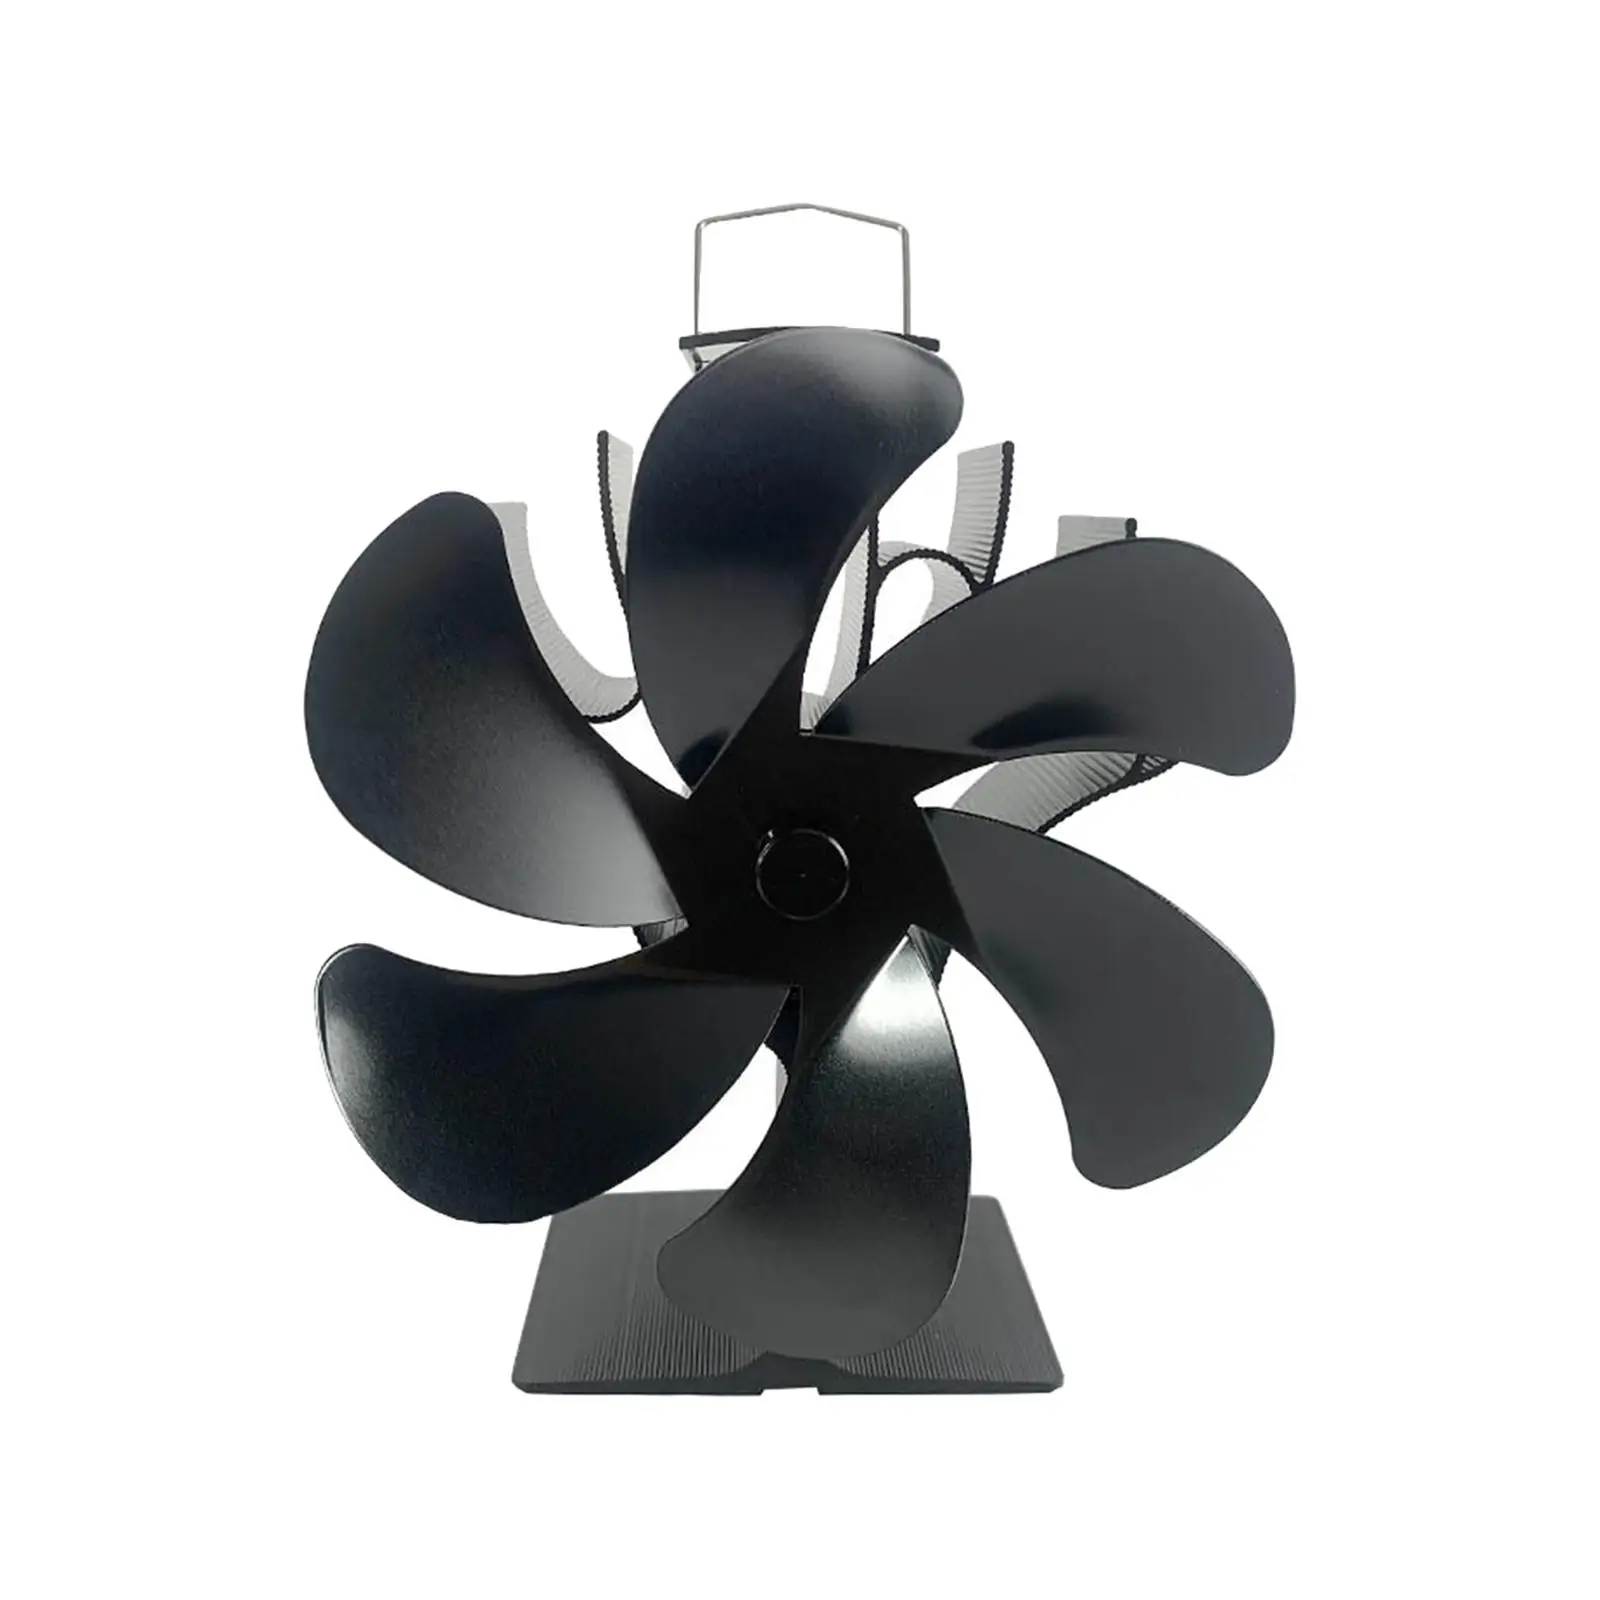 6 Blades Heat Powered Fireplace Fan Non Wood/logs Stove Fan for Fireplace Picnics Heaters Log Burner Wood Burning Stove